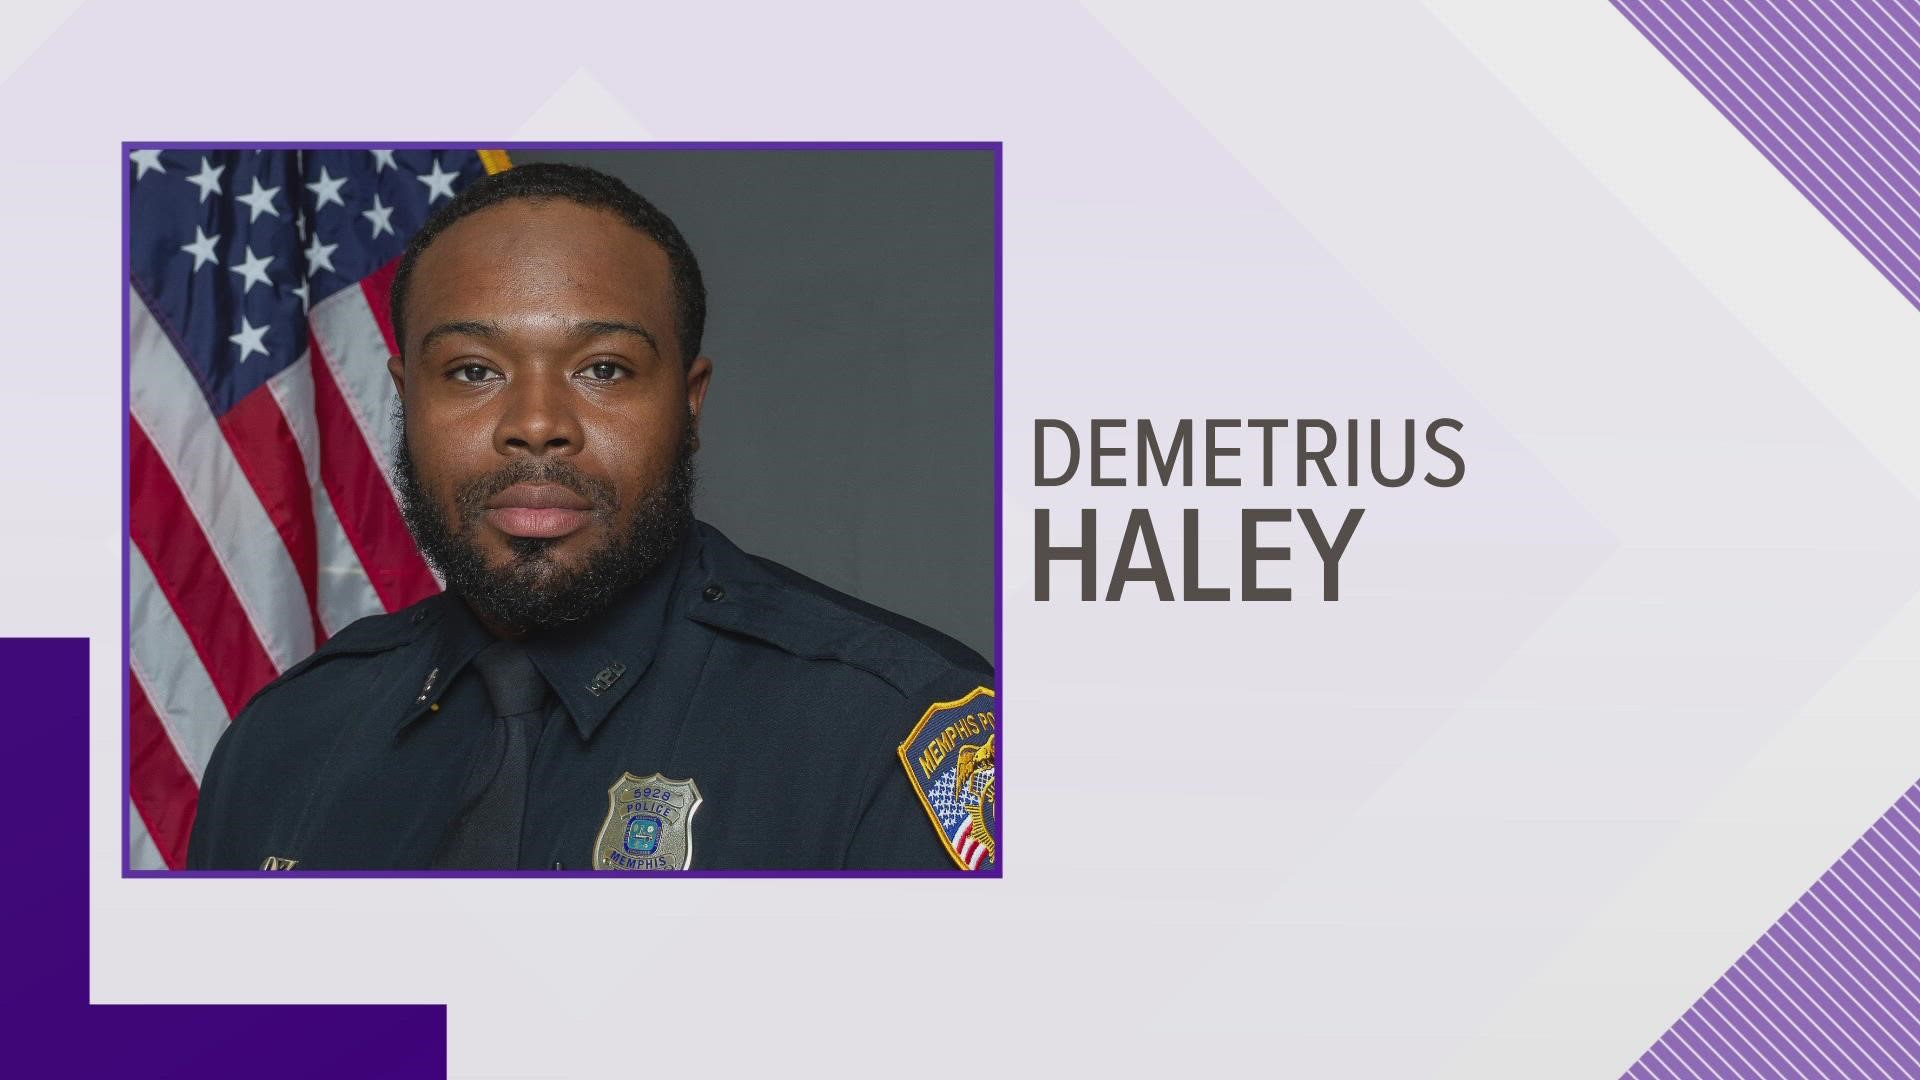 Demetrius Haley is one of five officers fired Friday for their involvement in Nichols' death. He previously worked at the Shelby County Jail as a corrections officer